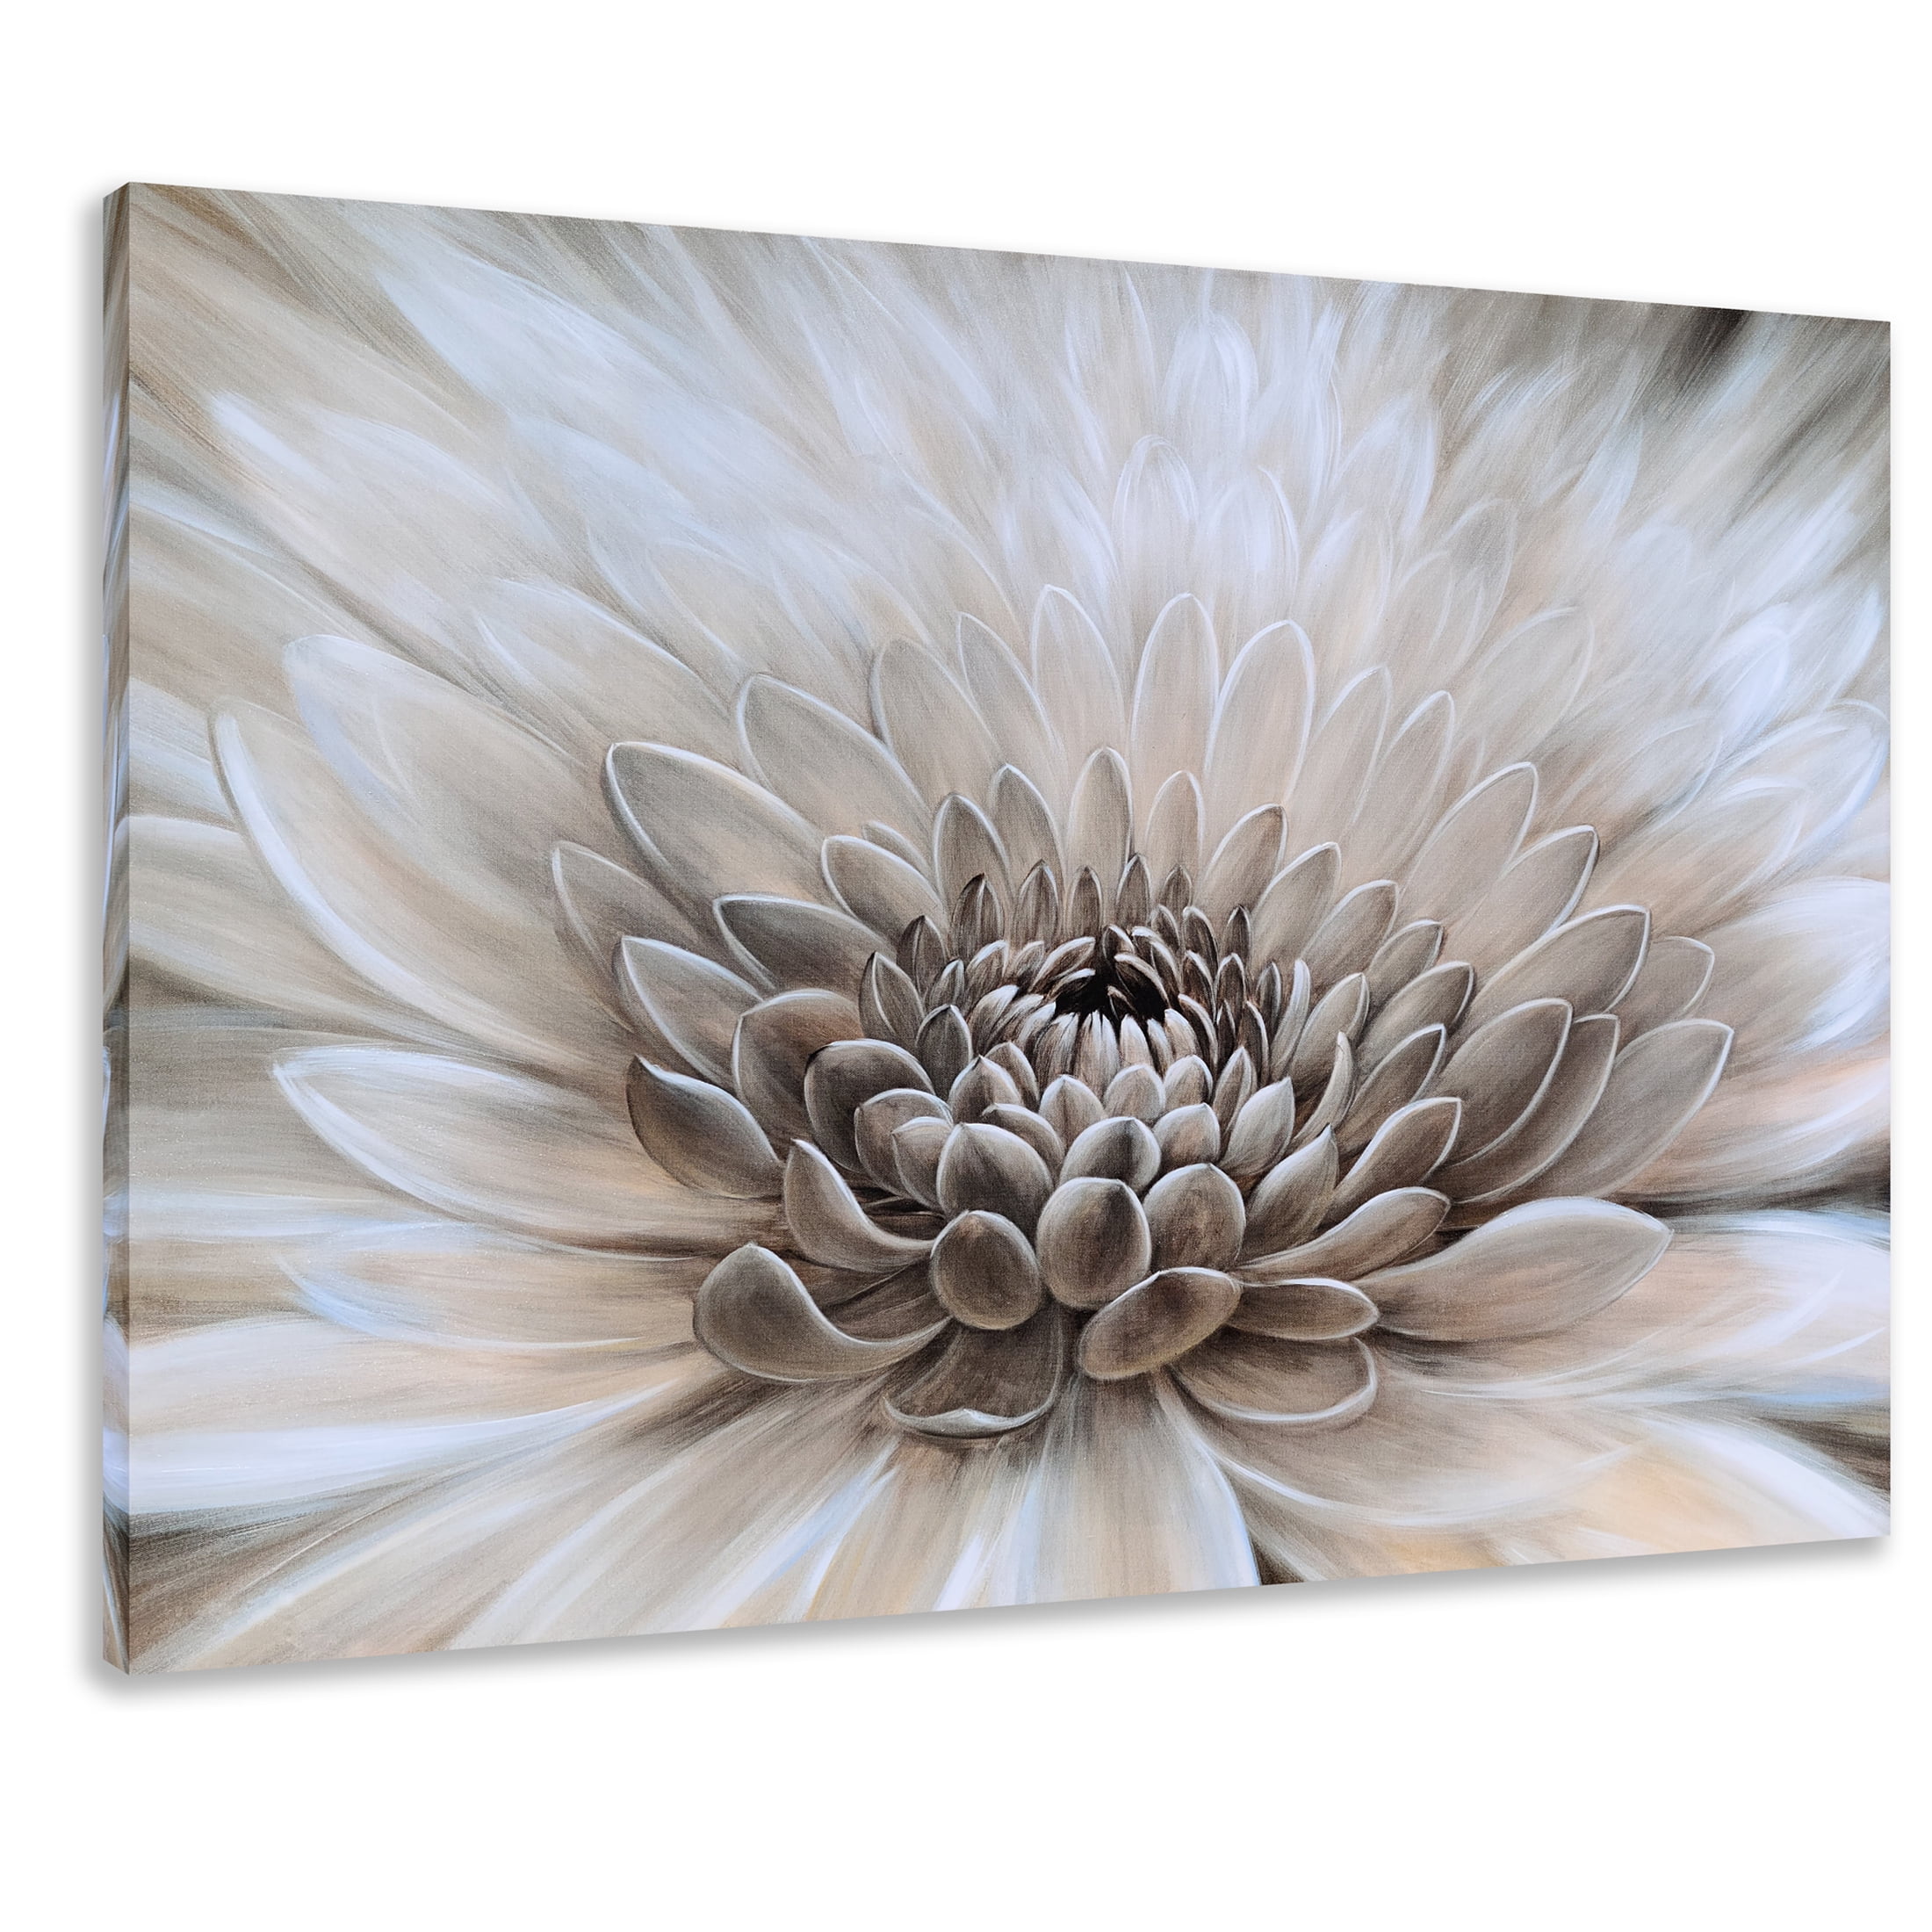 SYGALLERIER Brown Canvas Wall Art with Textured Modern Flower Paining ...